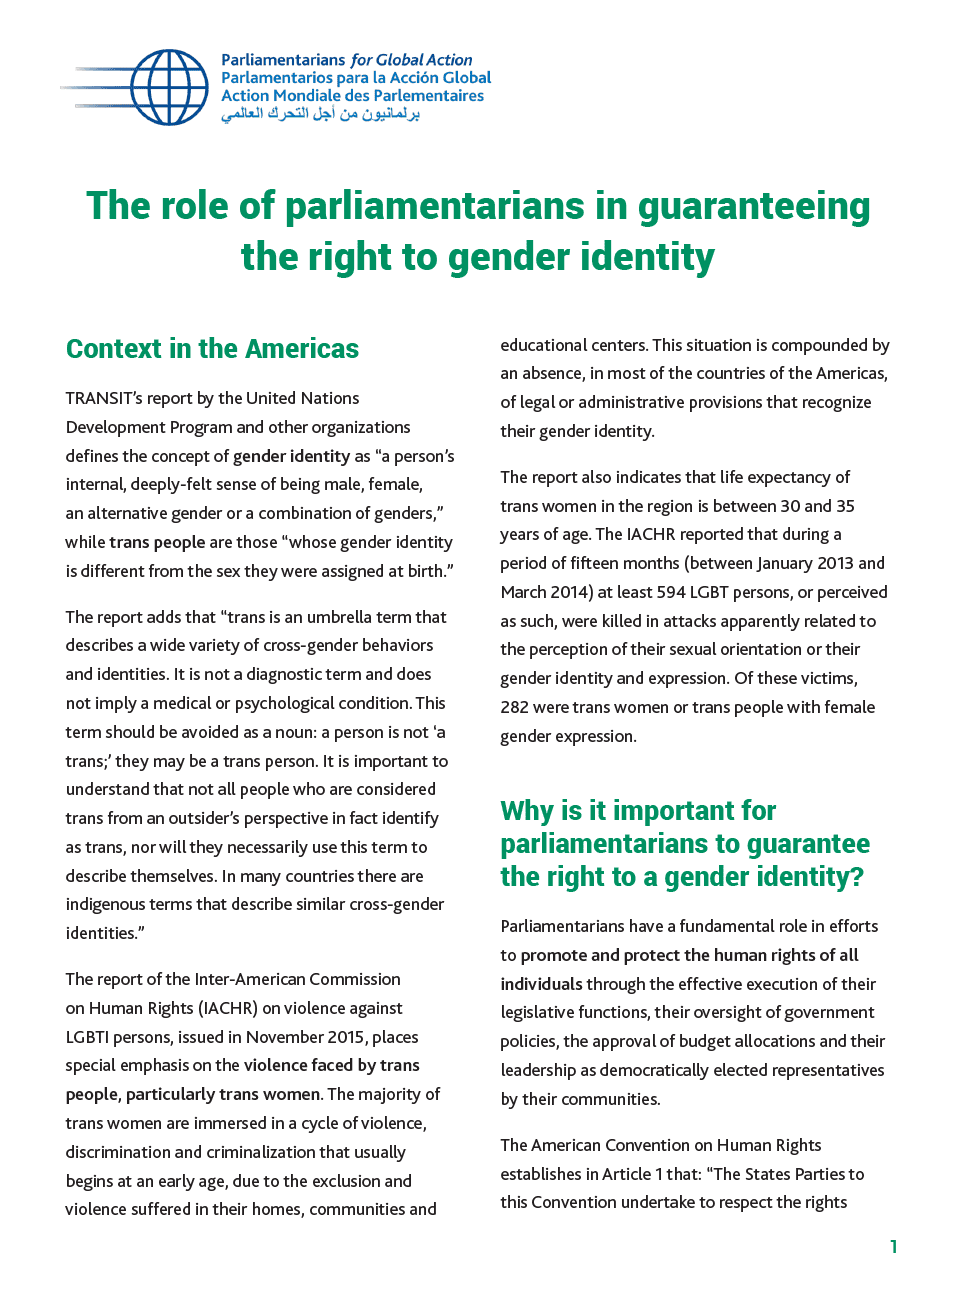 Advocacy Brief: The role of parliamentarians in guaranteeing the right to gender identity